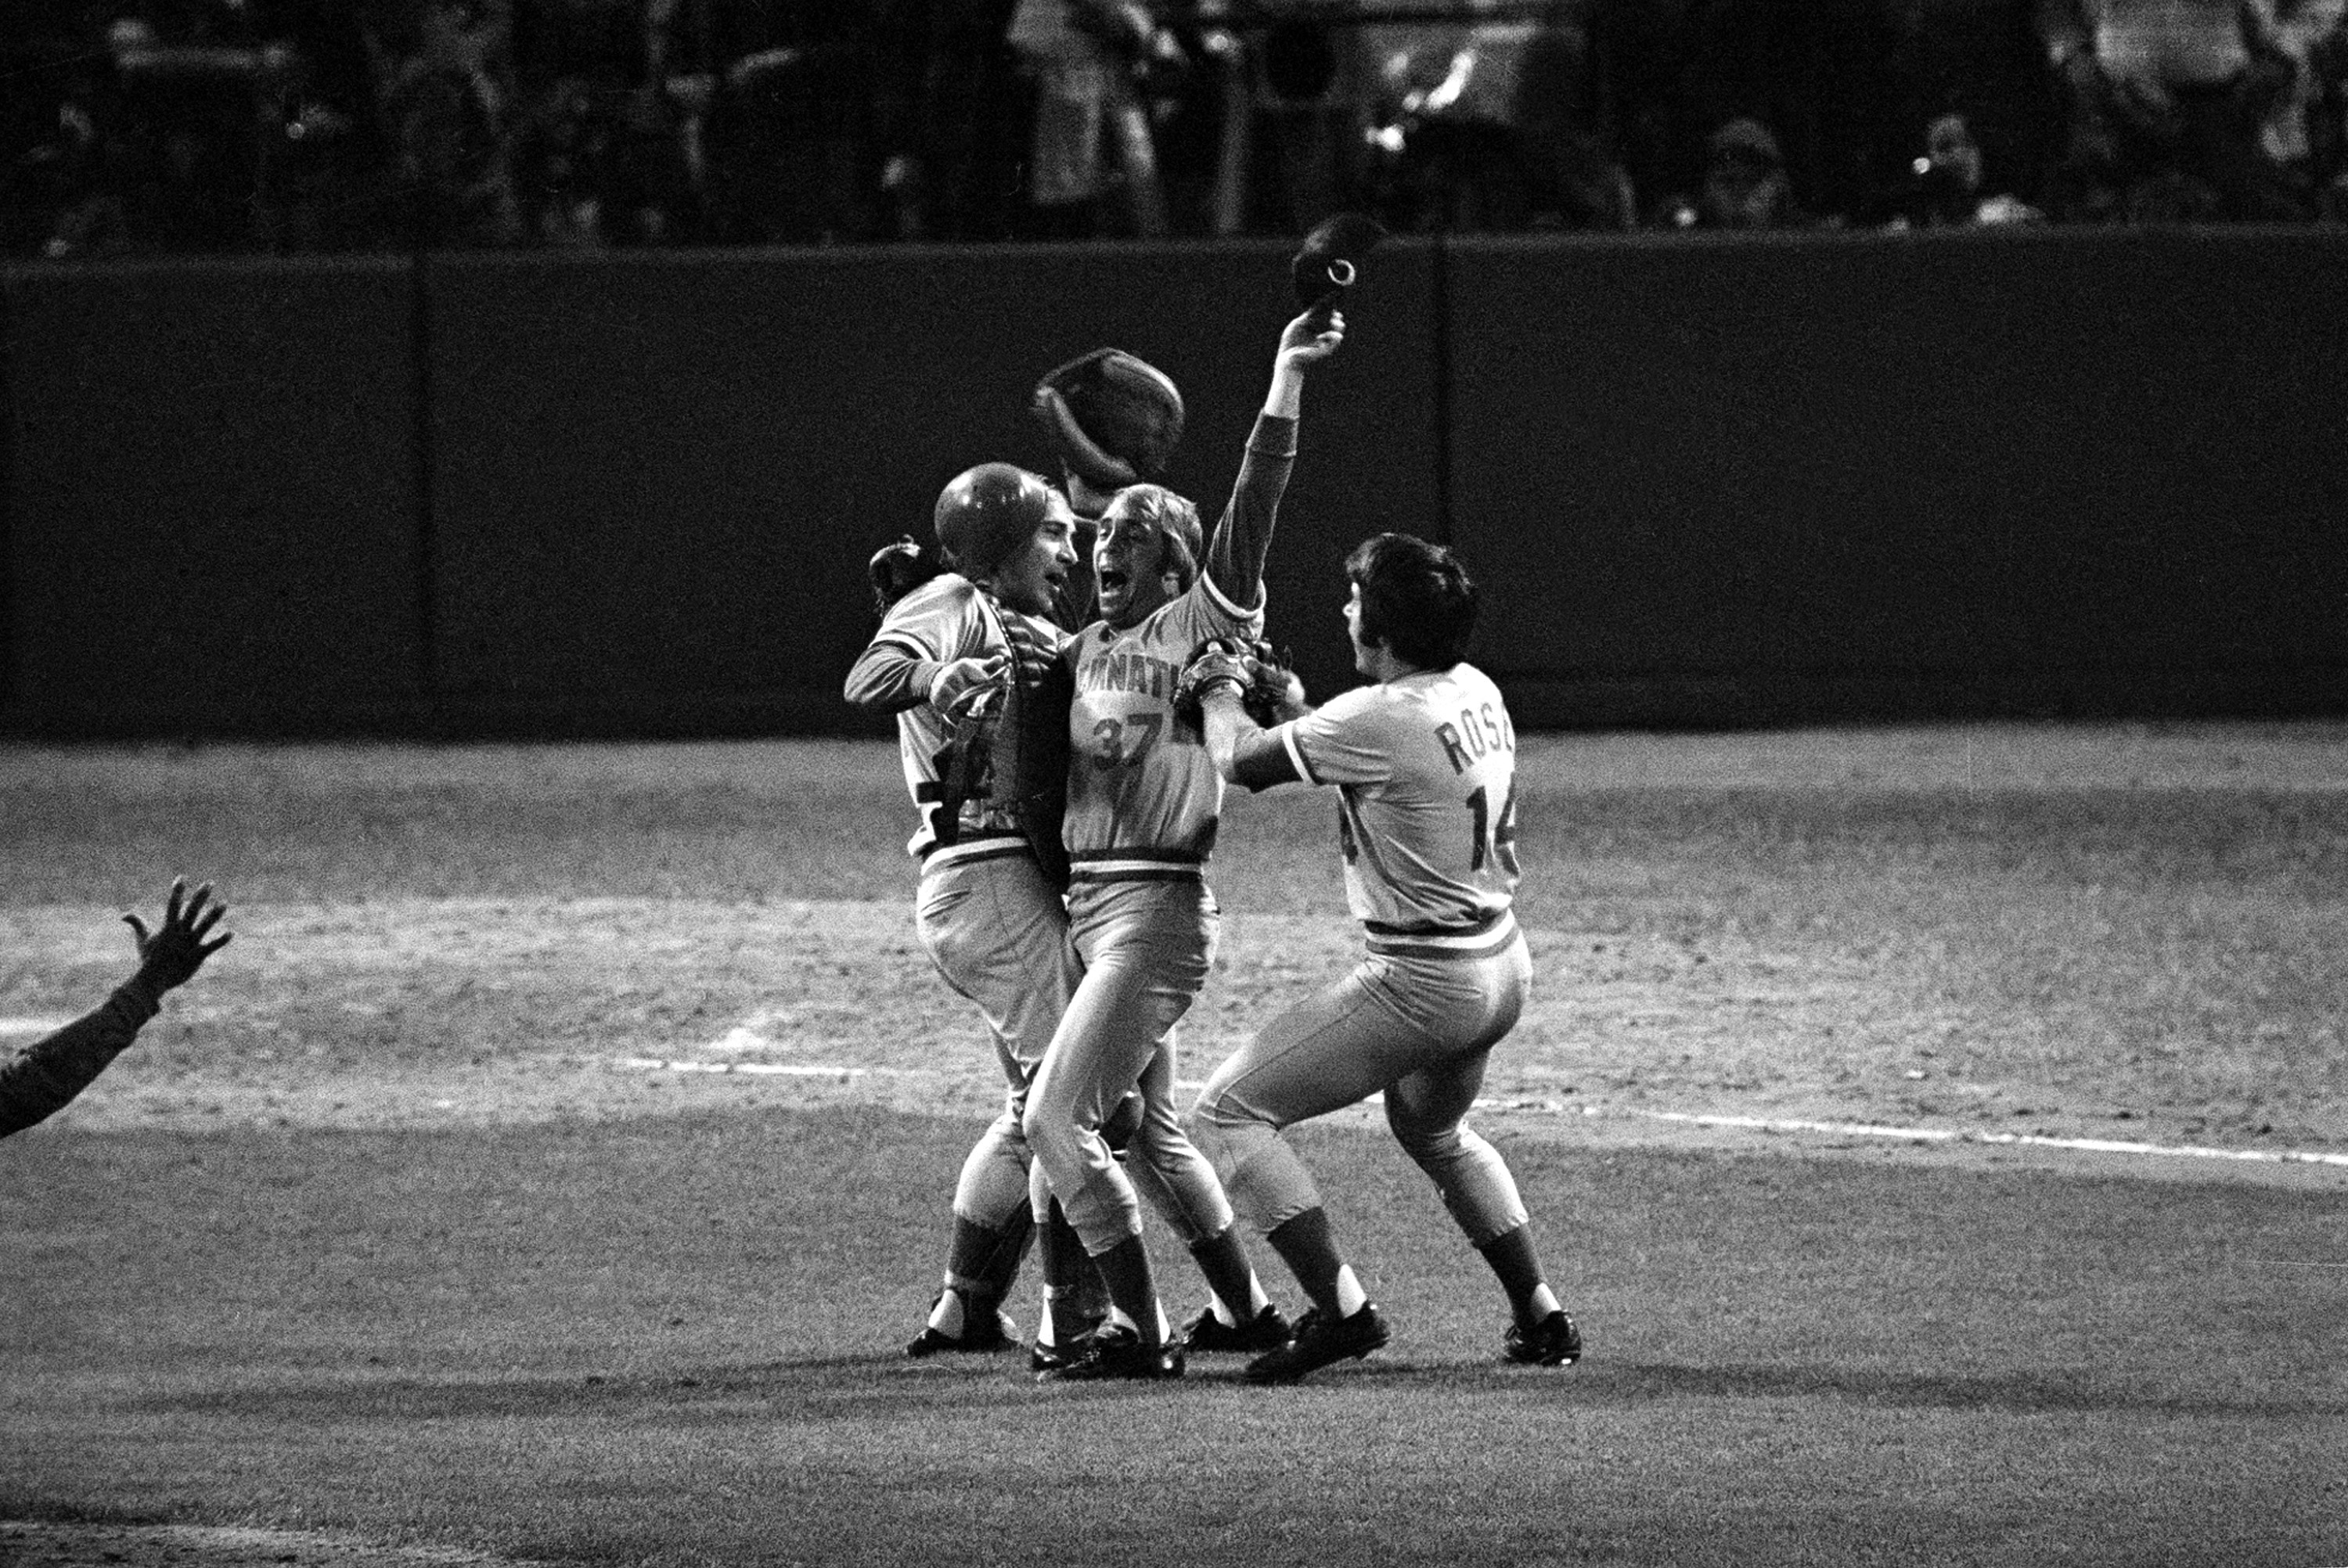 Reds win Game 3 of the 1976 World Series in New York 